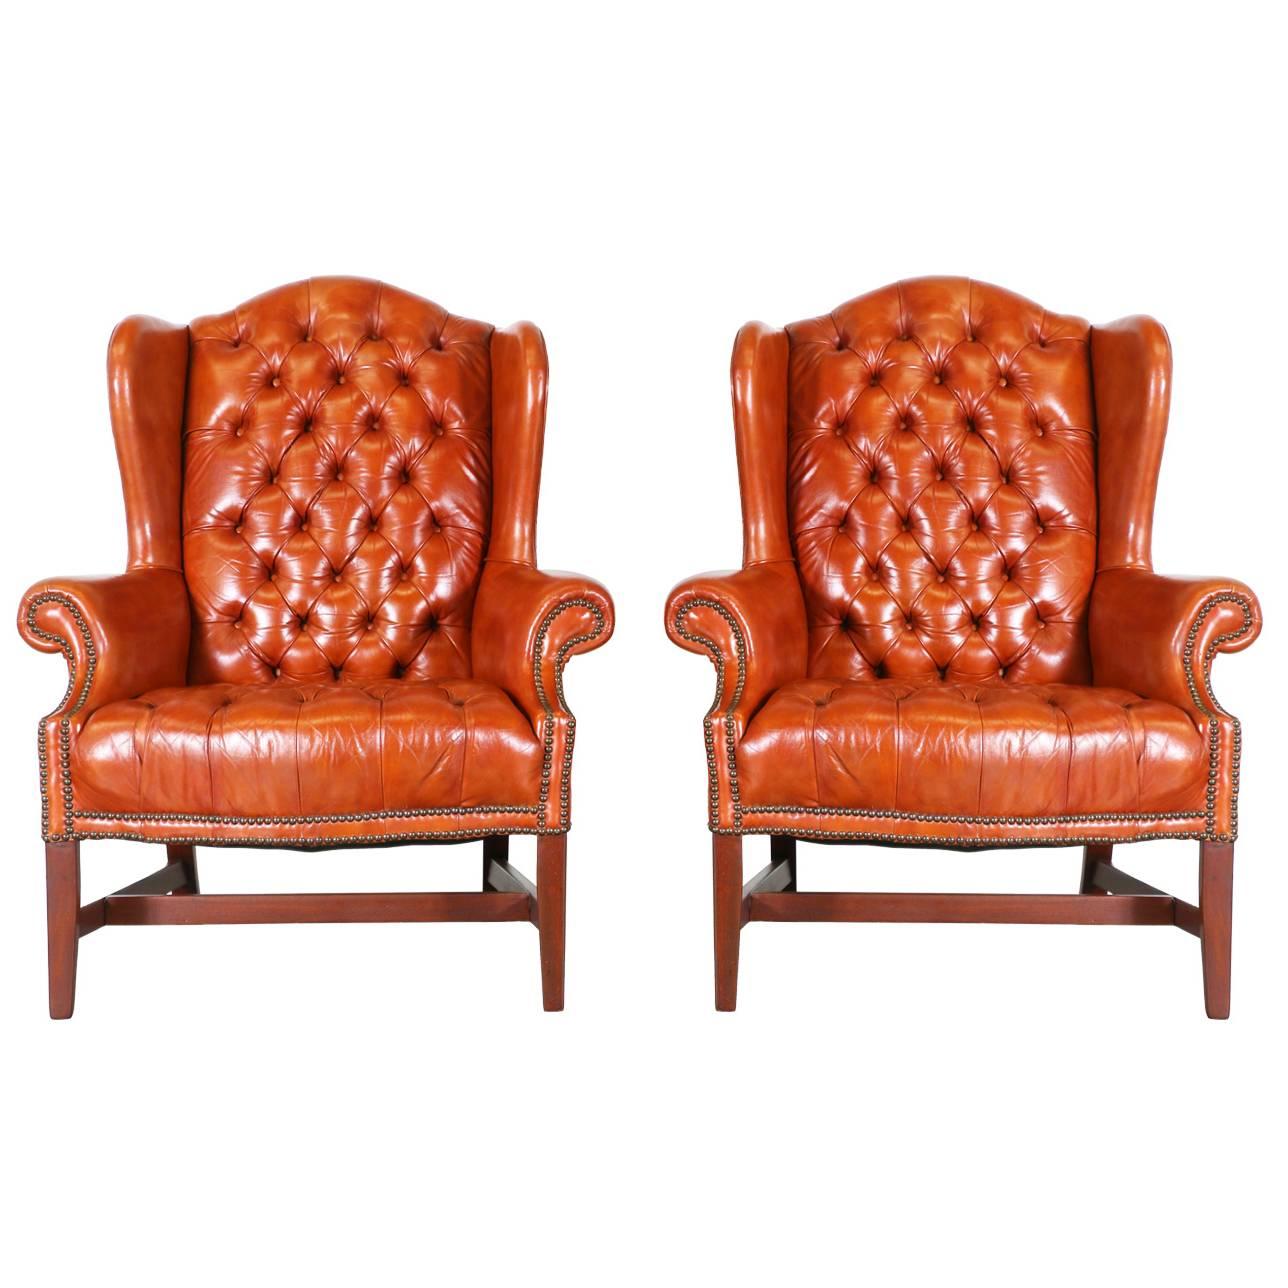 Pair of Chesterfield Leather High Back Chairs